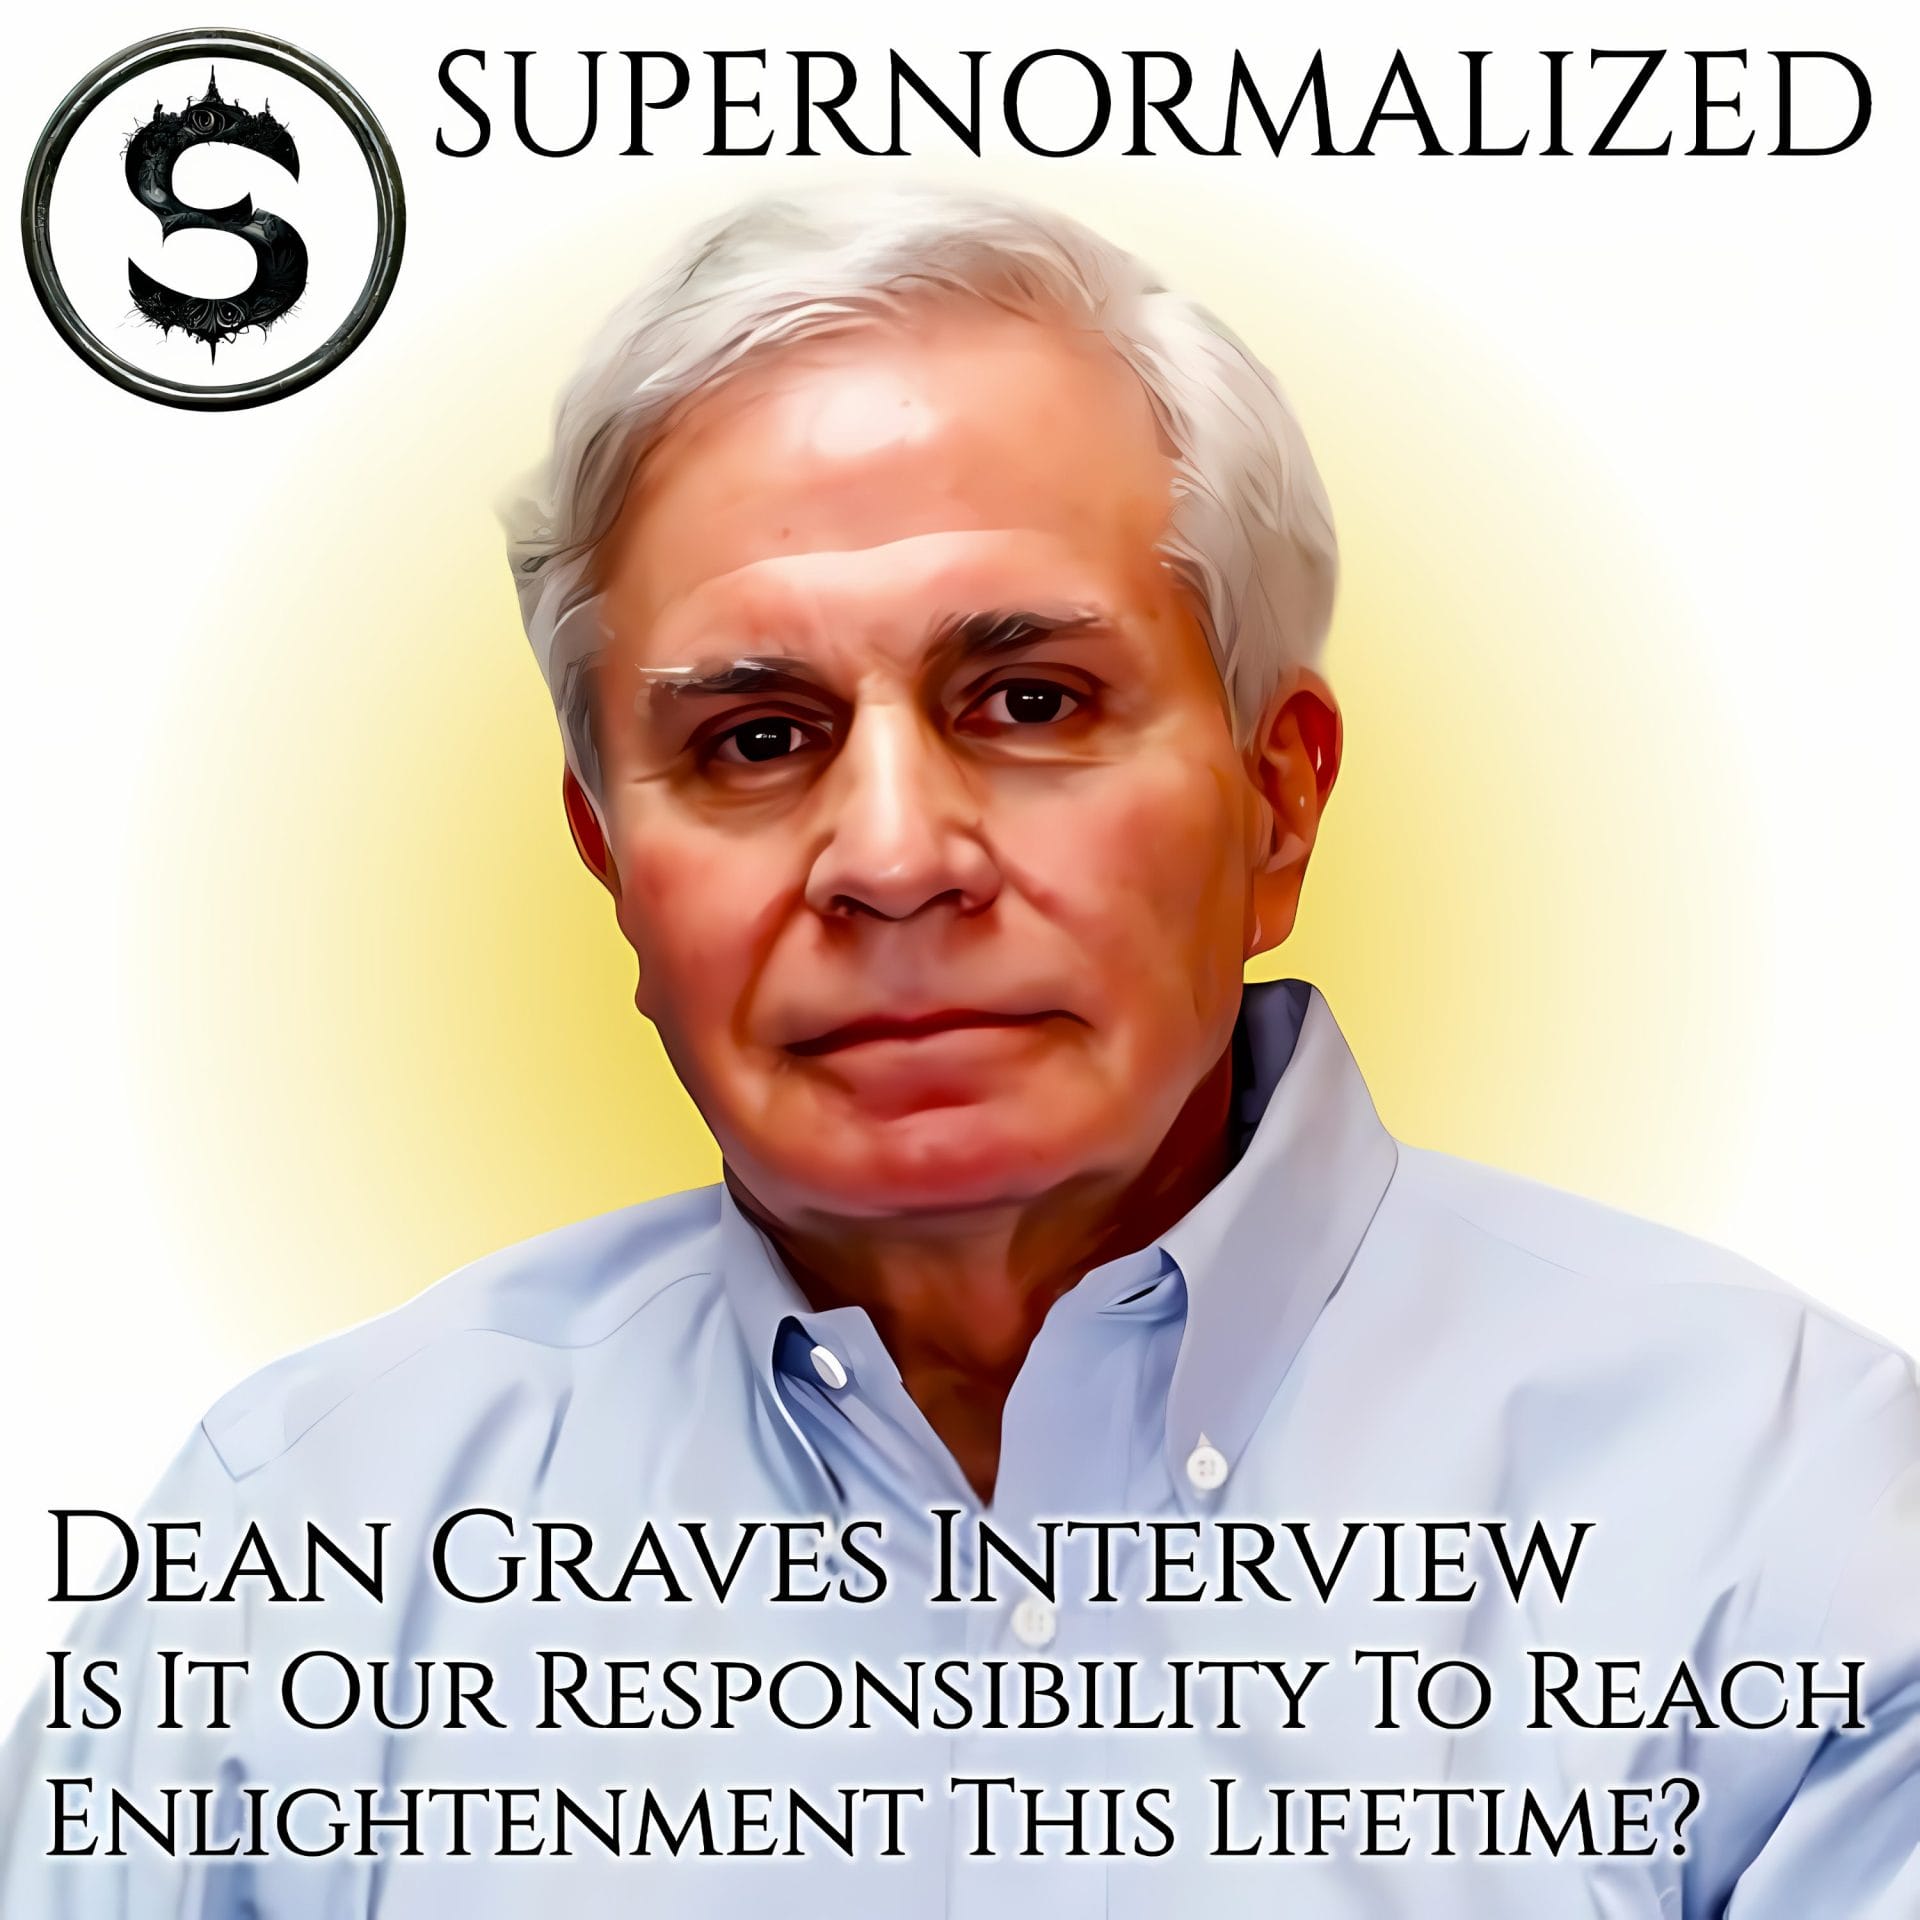 Dean Graves Interview Is It Our Responsibility To Reach Enlightenment This Lifetime?